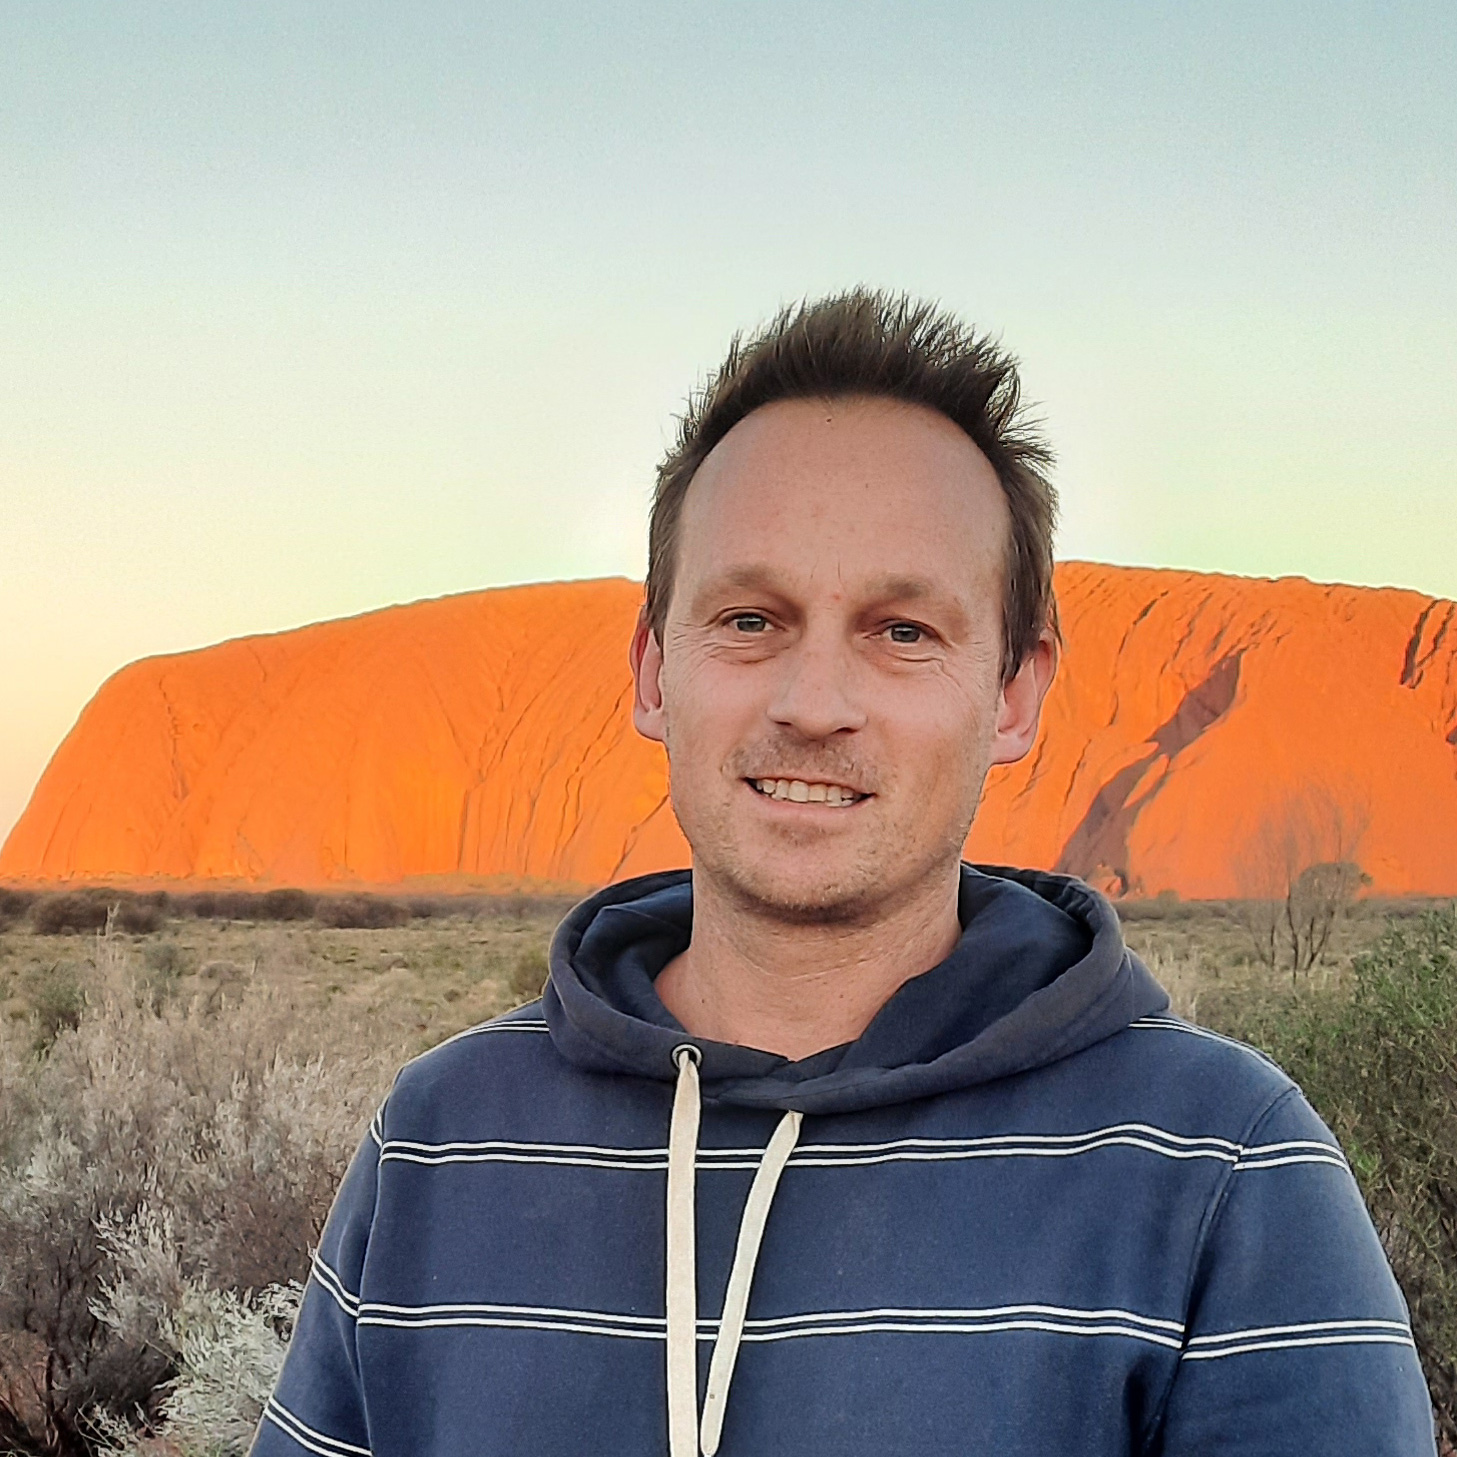 Tim stands in front of the uluru wearing a navy striped sweater. He has short brown hair. 